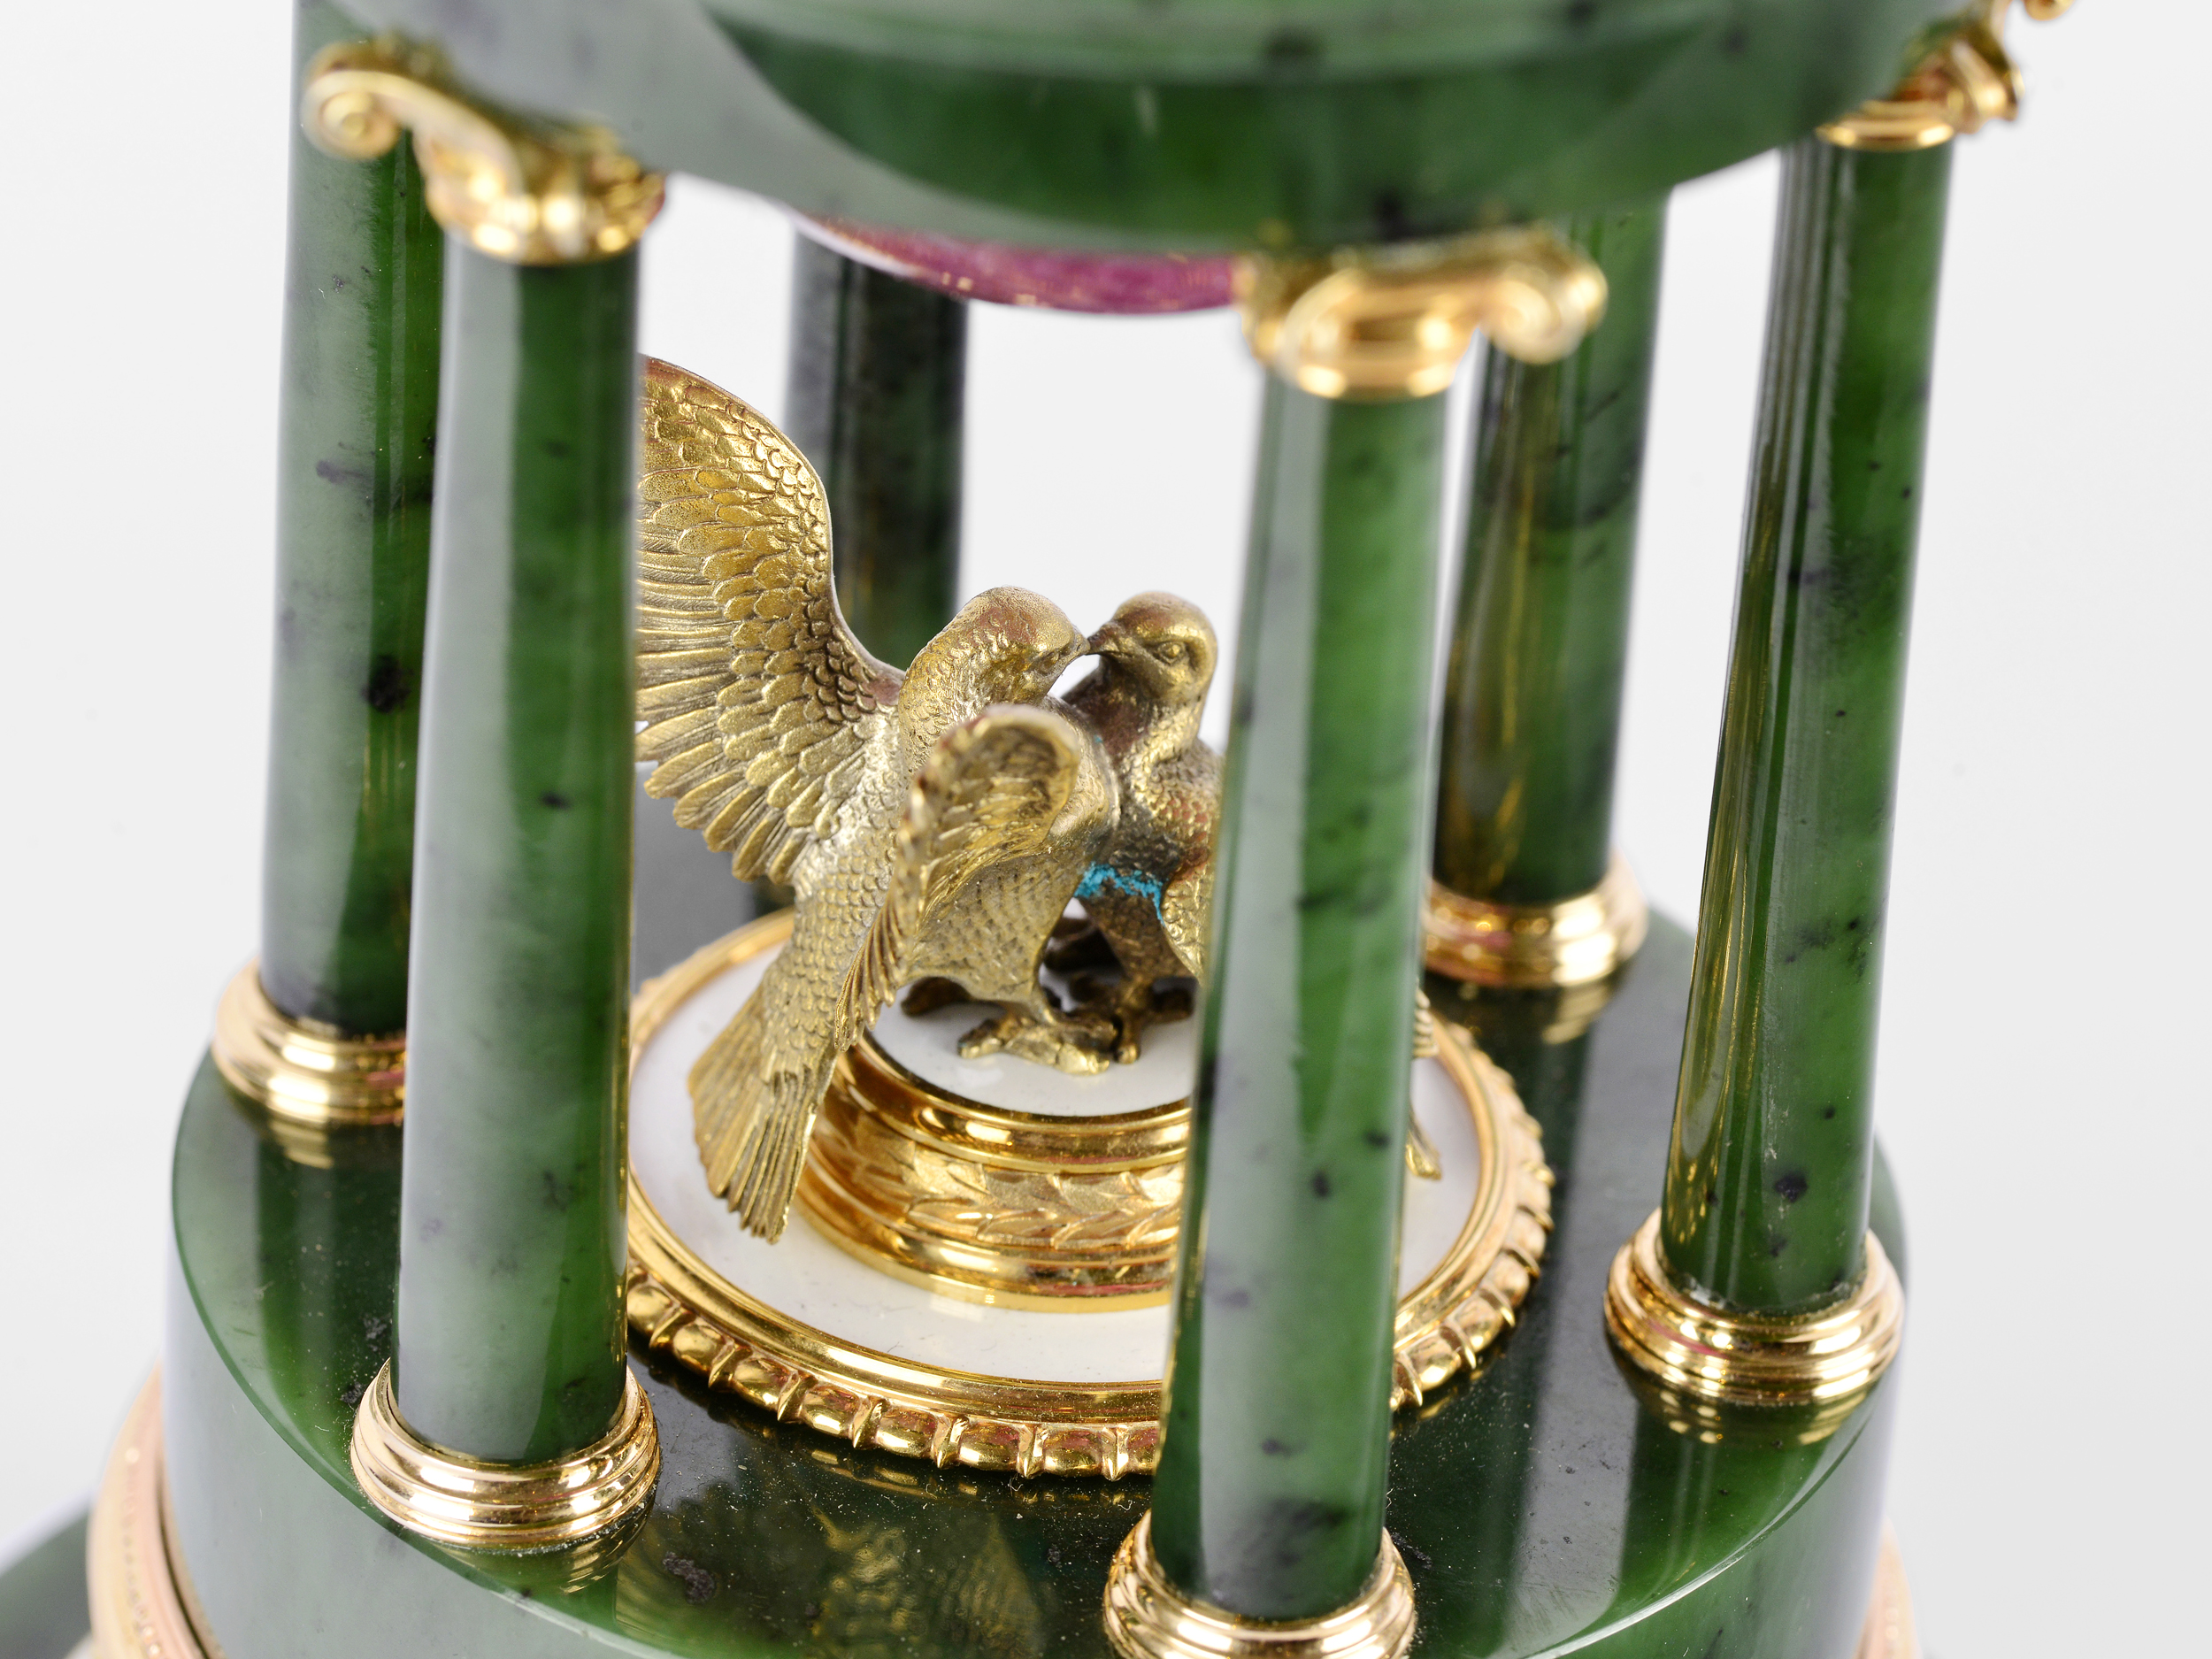 A highly significant unique colonnade clock in the style of Peter Carl Fabergé, Saint Petersburg 184 - Image 11 of 17